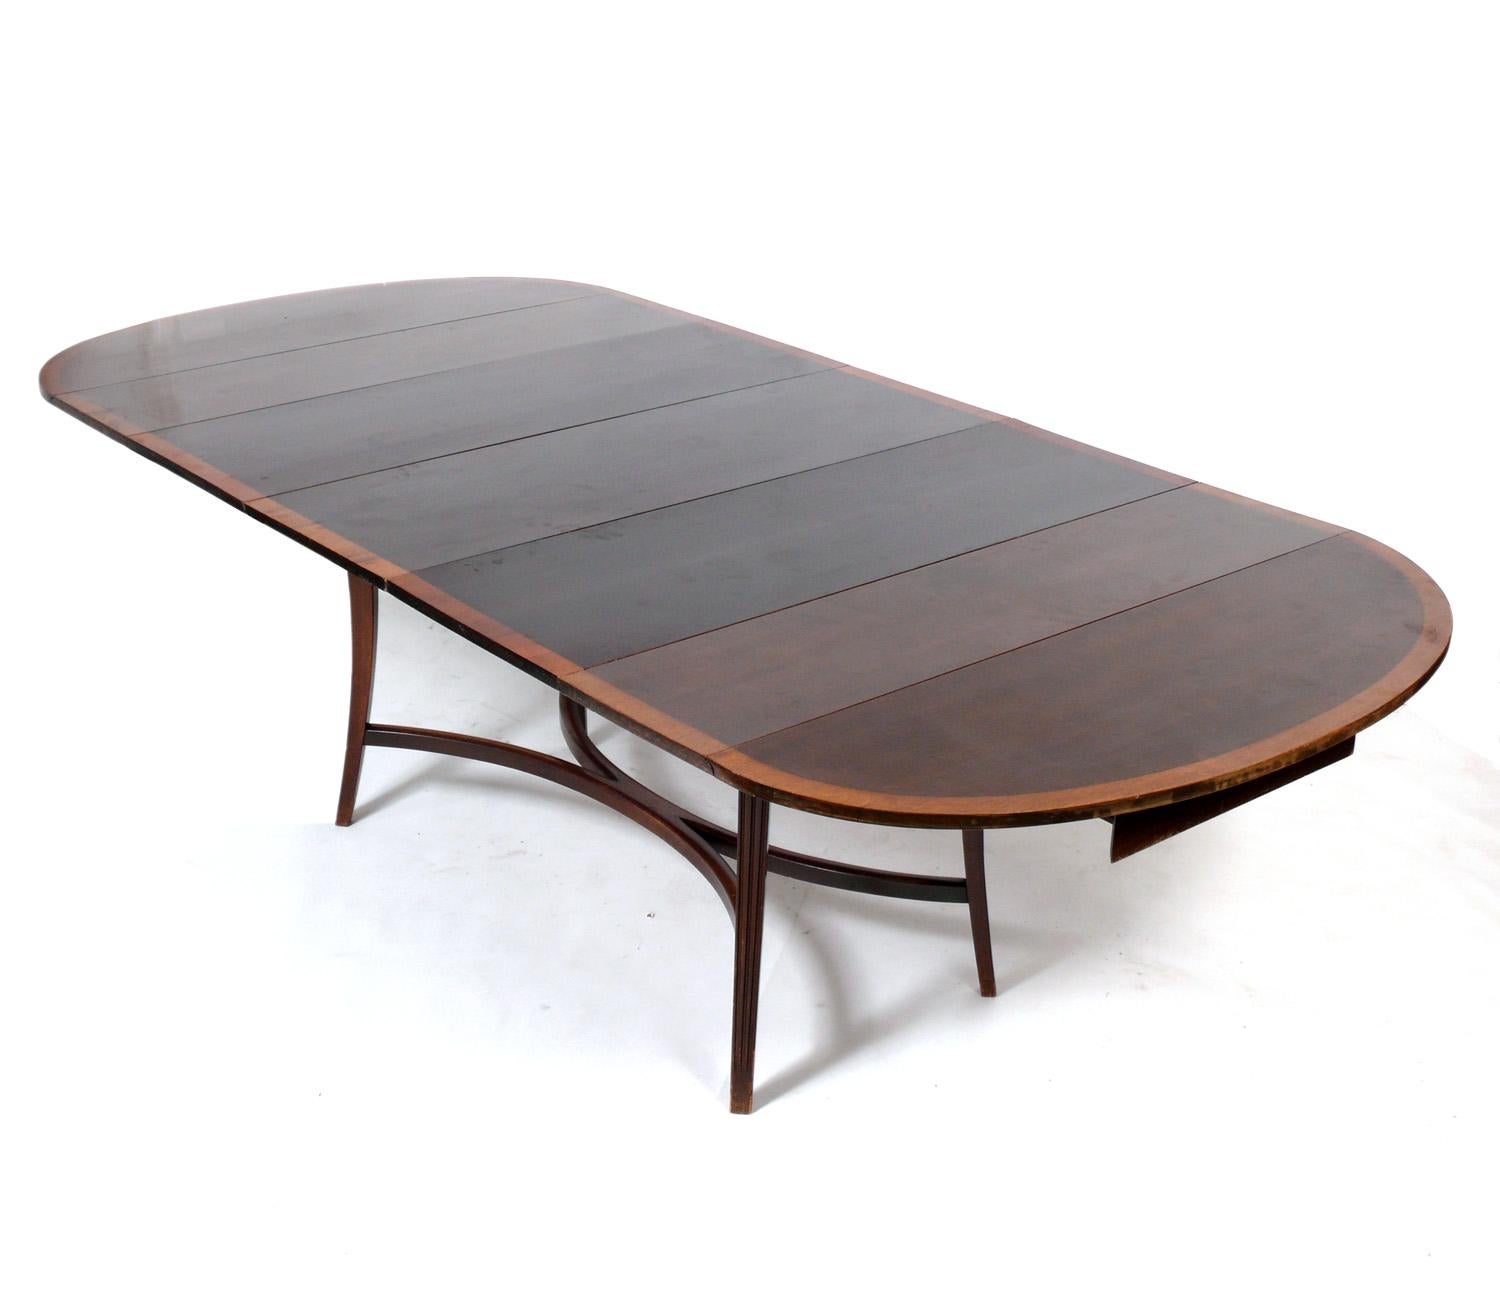 Elegant dining table, designed by Tommi Parzinger for Charak Modern, American, circa 1950s. This table is currently being refinished and can be completed in your choice of finish color. The price noted INCLUDES refinishing in your choice of color.